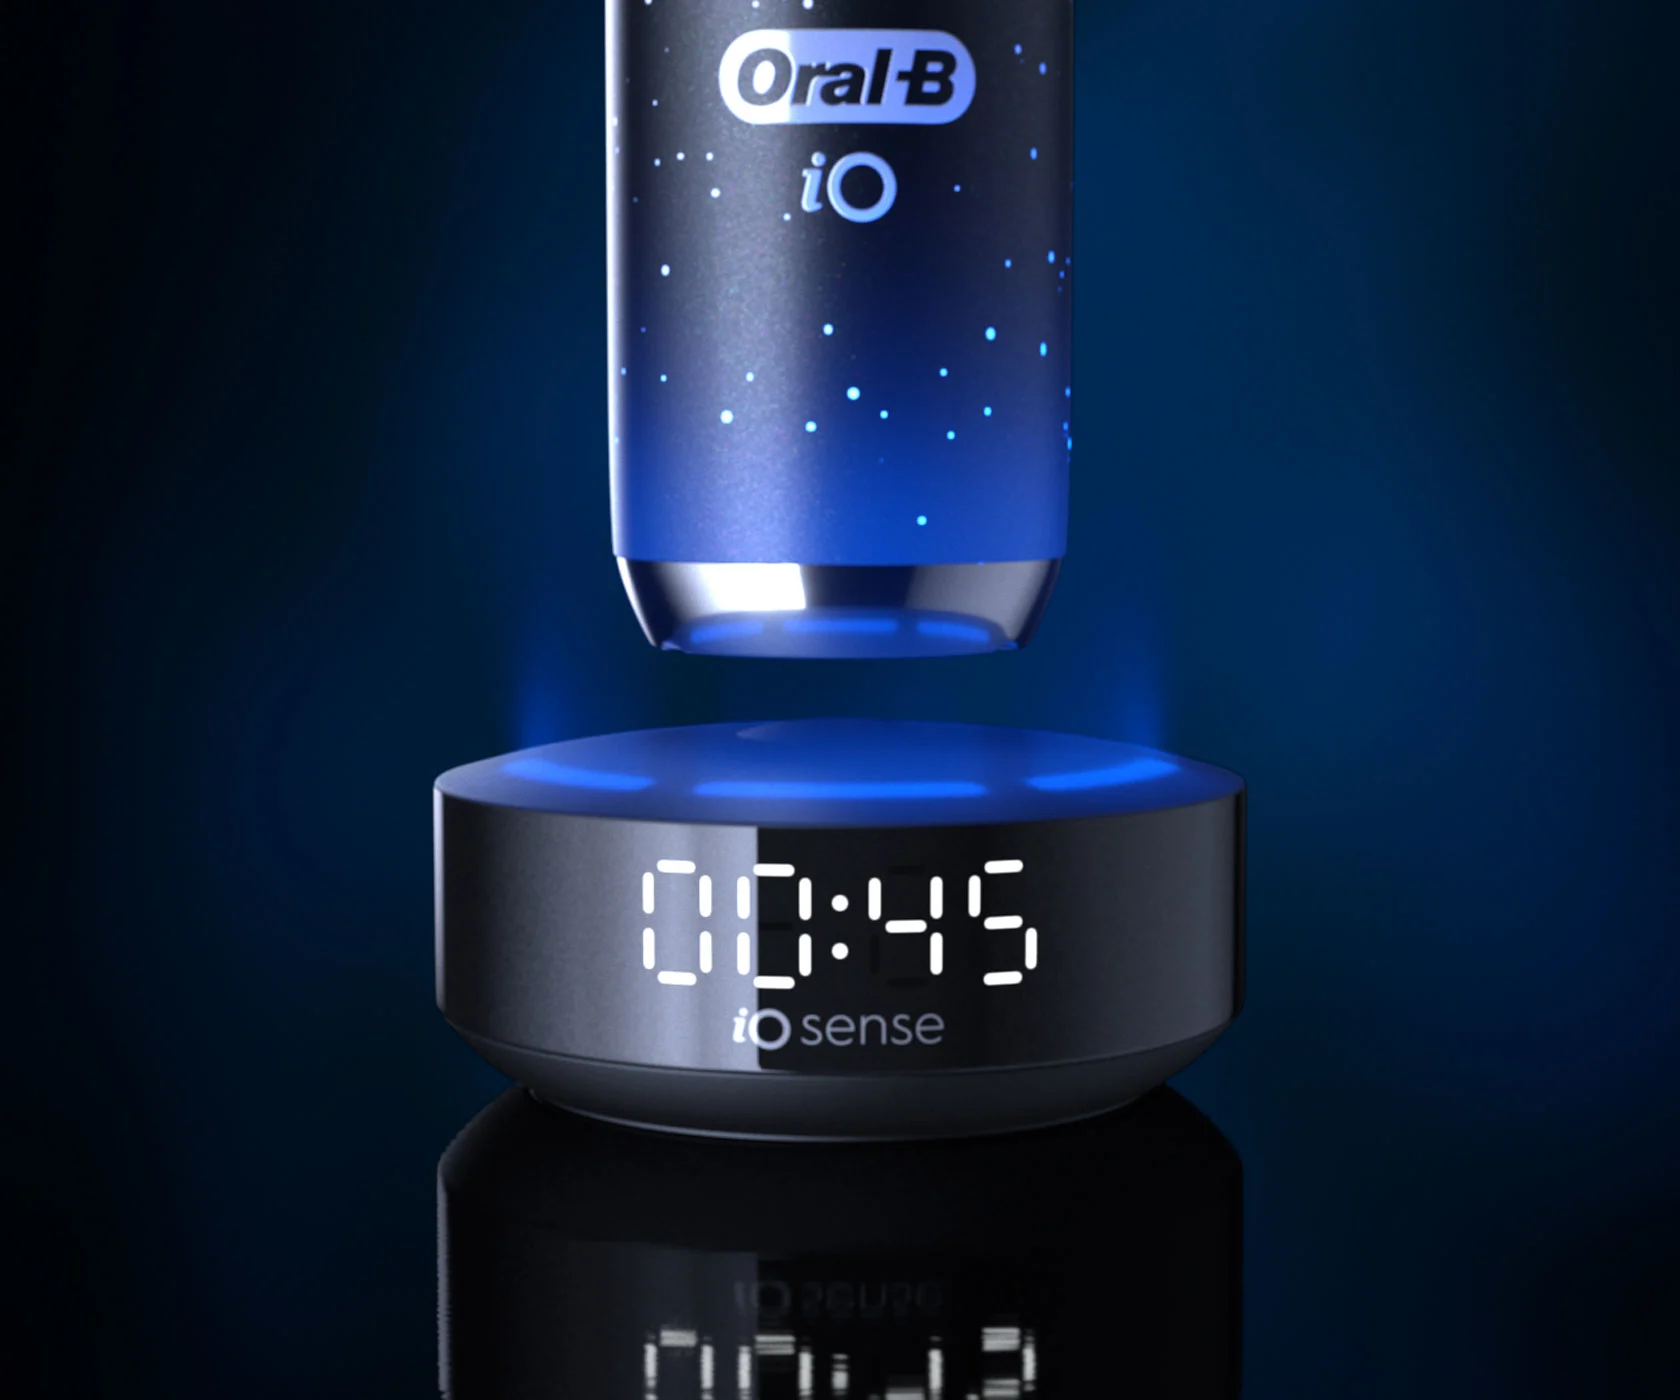 Black Oral-B iO Series 9 toothbrush on charging stand 